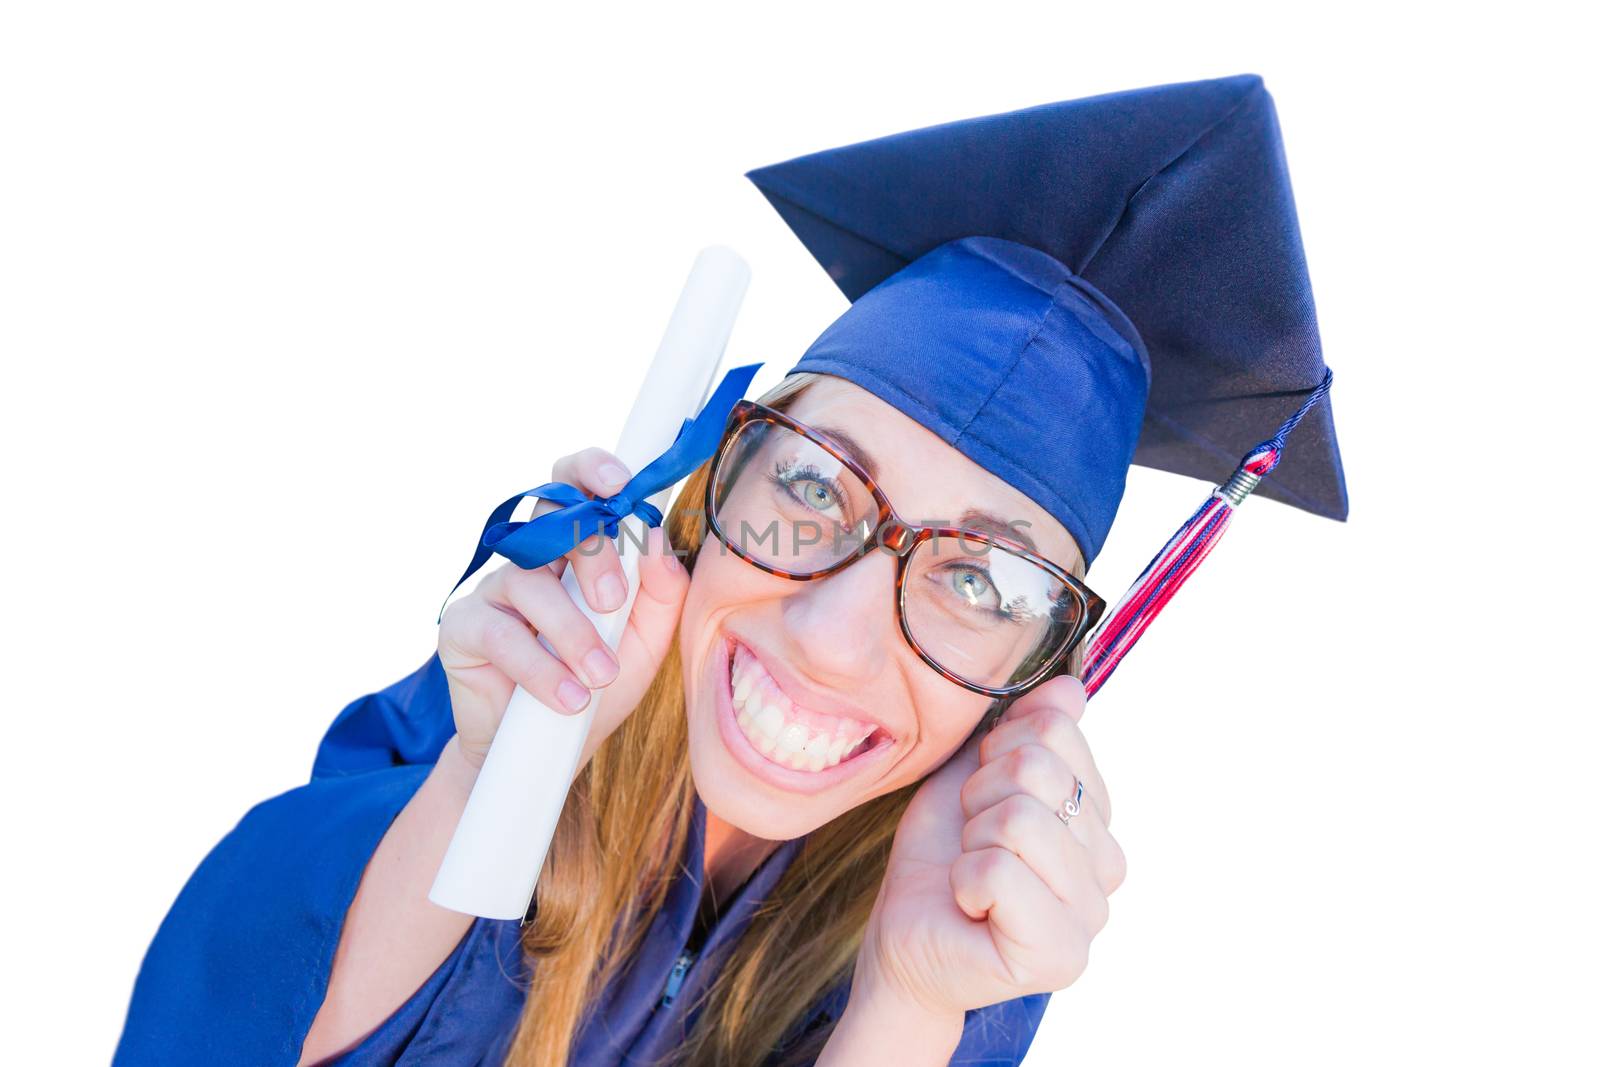 Goofy Graduating Young Girl In Cap and Gown Isolated on a White Background. by Feverpitched